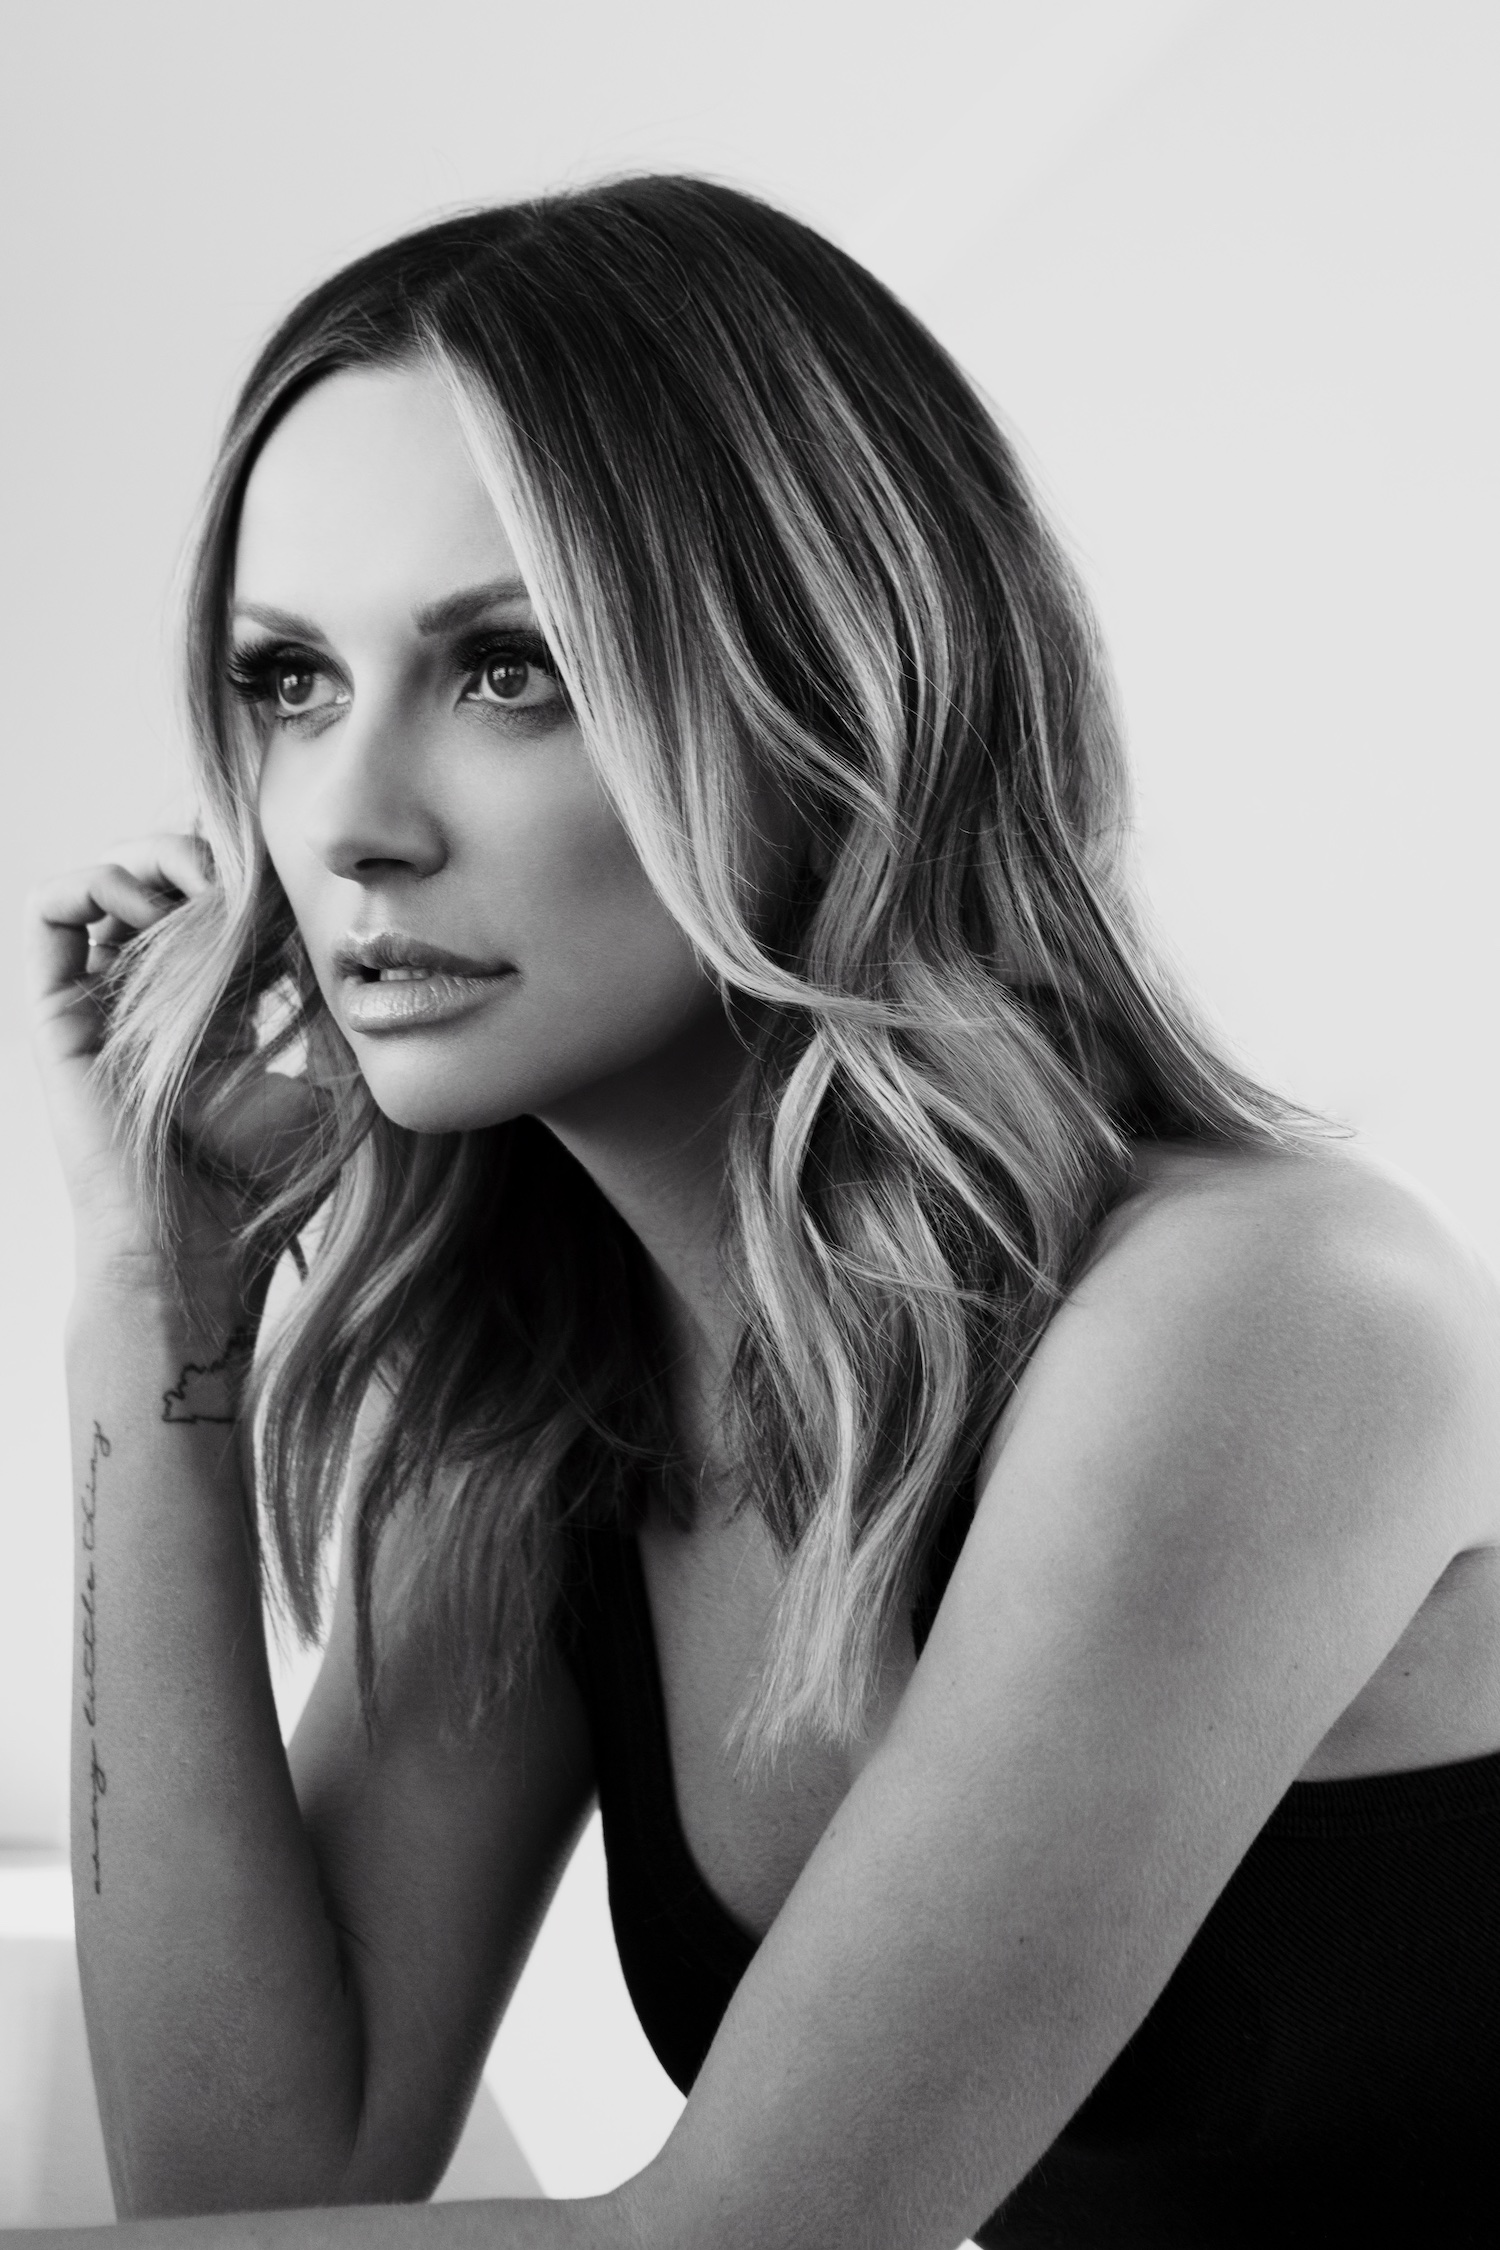 Interview: Carly Pearce Takes Us on a Journey of the Heart with